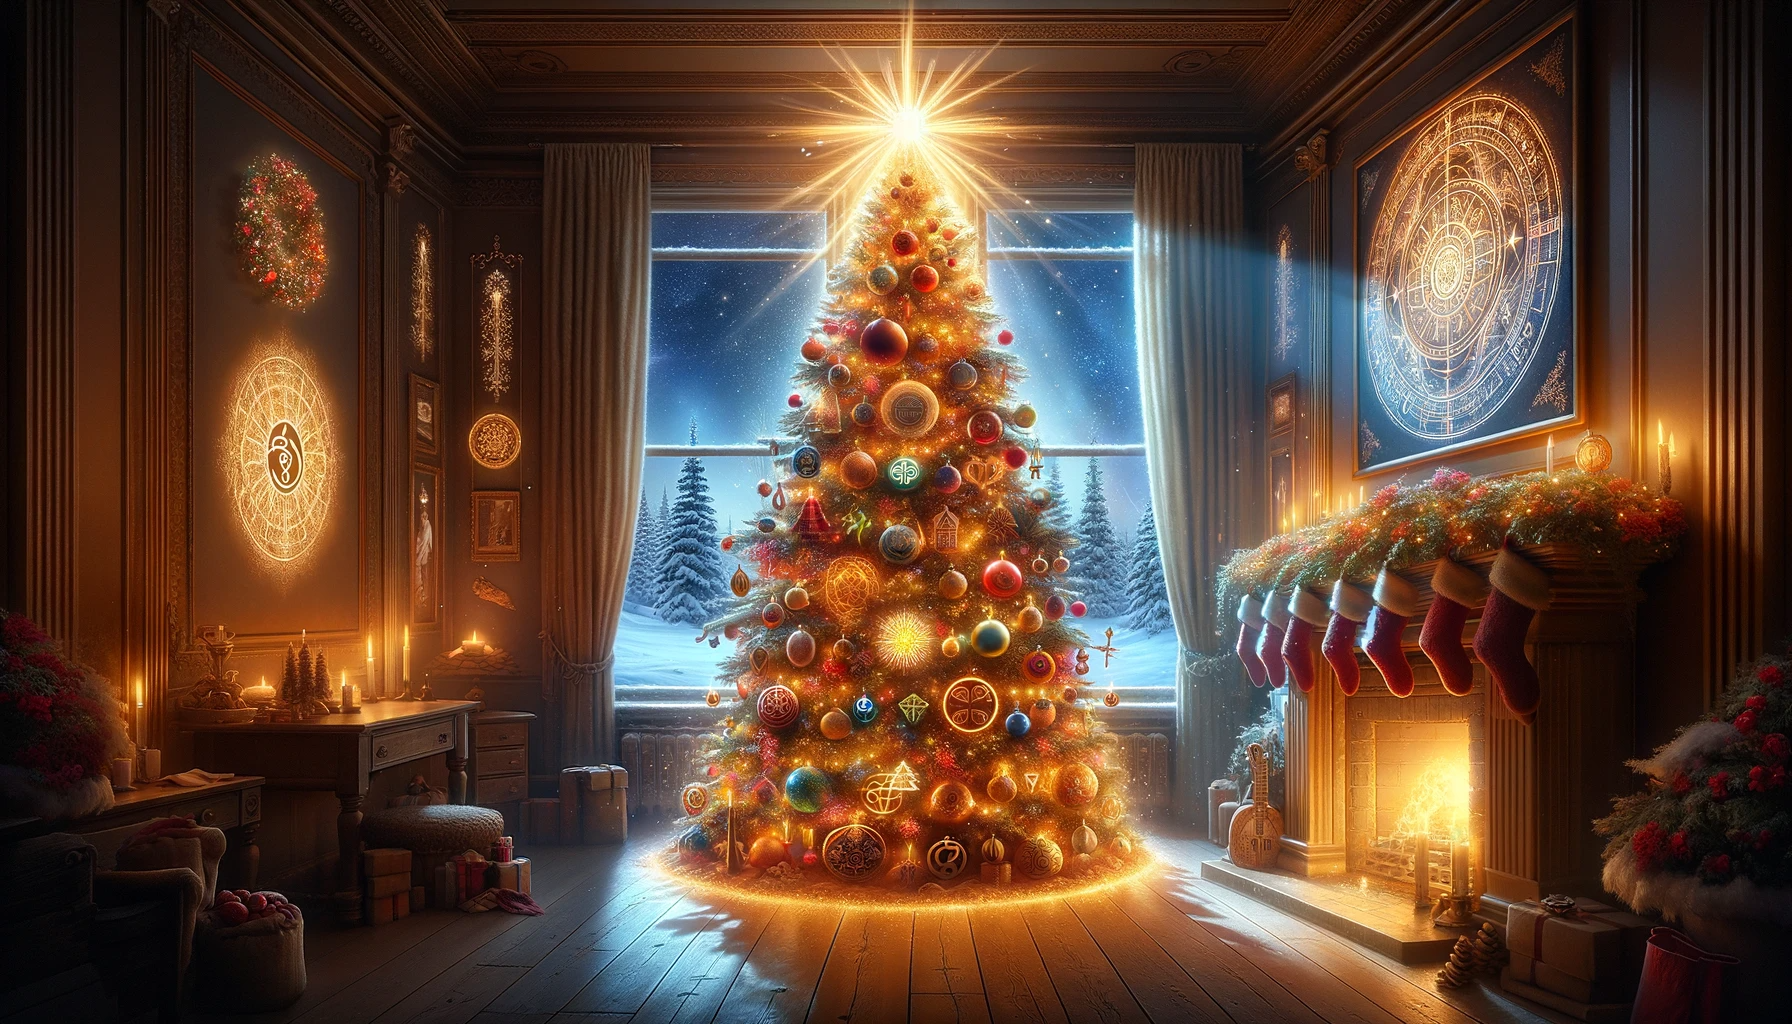 Spiritual Meaning of The Christmas Tree: A Symbol of Everlasting Life and Light